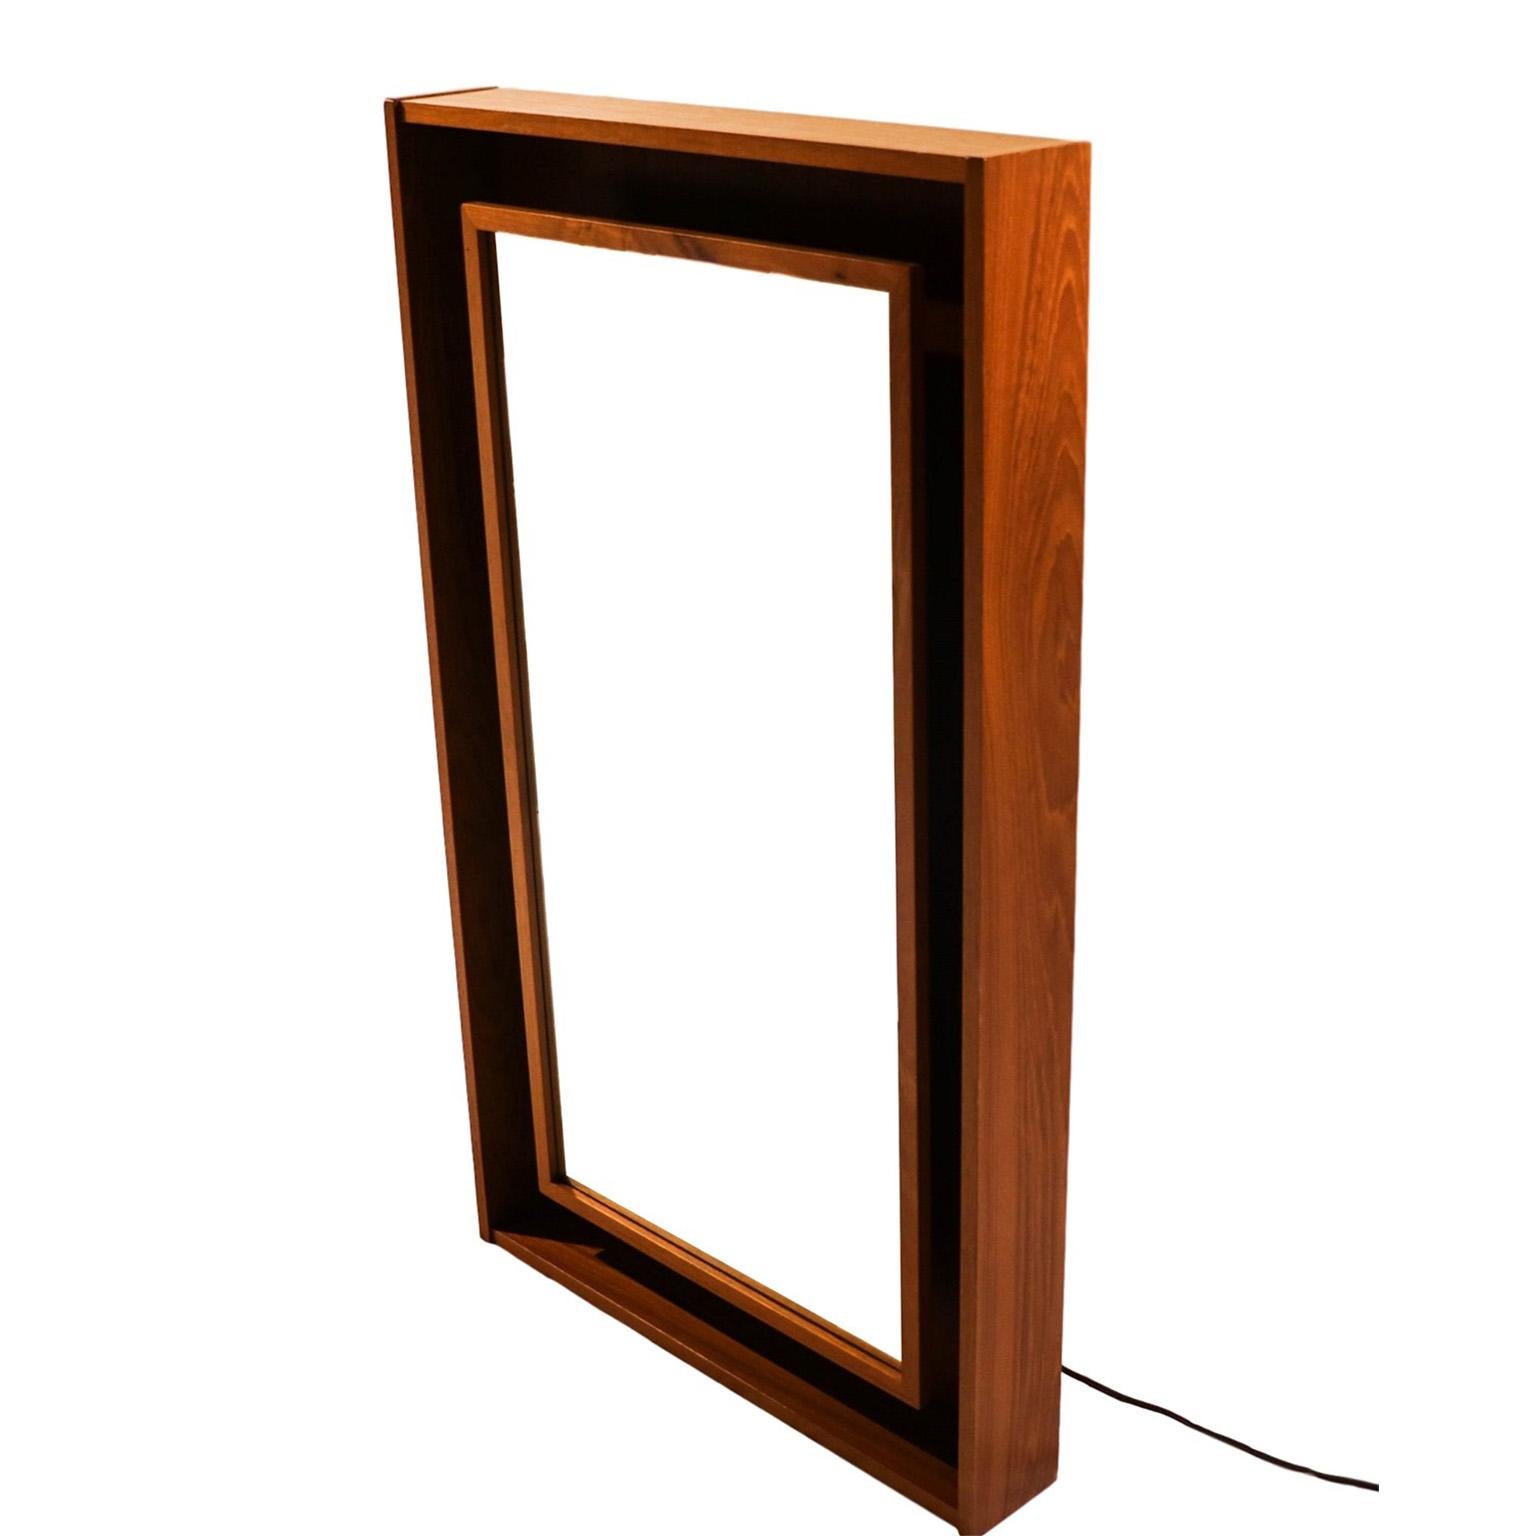 Beautiful large and impressive backlit teak framed Danish rectangular mirror. Made in Denmark by Pedersen & Hansen, a high-end Danish Company. Features a shadowbox teak frame with a floating mirror that lights up from behind the inner frame in a